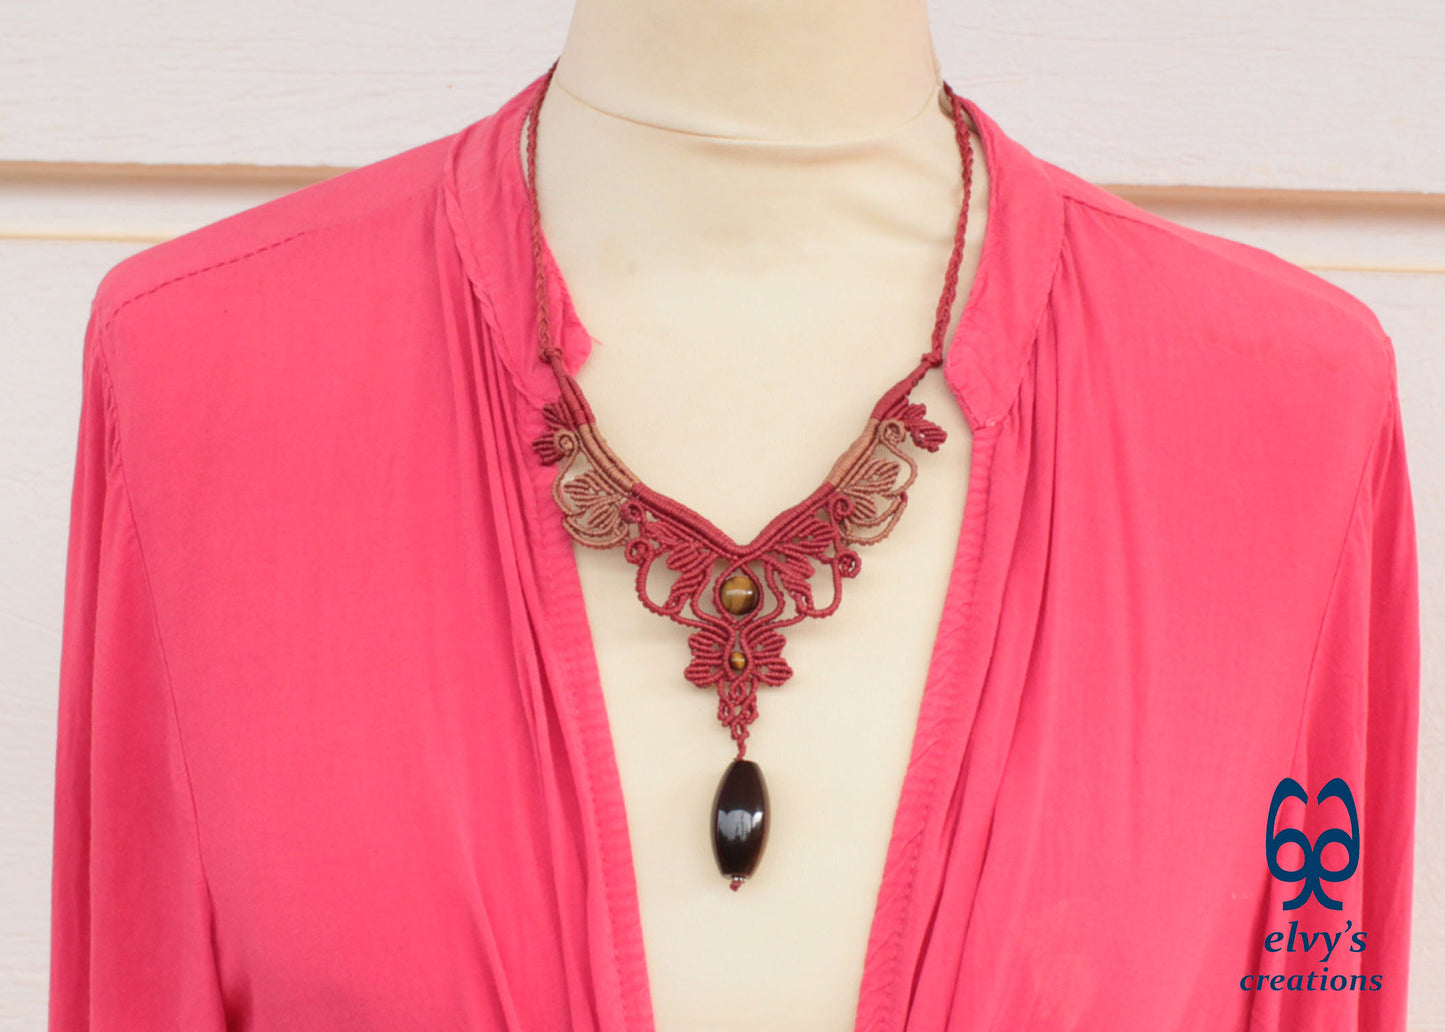 Red and Beige Macrame Necklace Handmade Macrame with Tiger Eye Gemstones